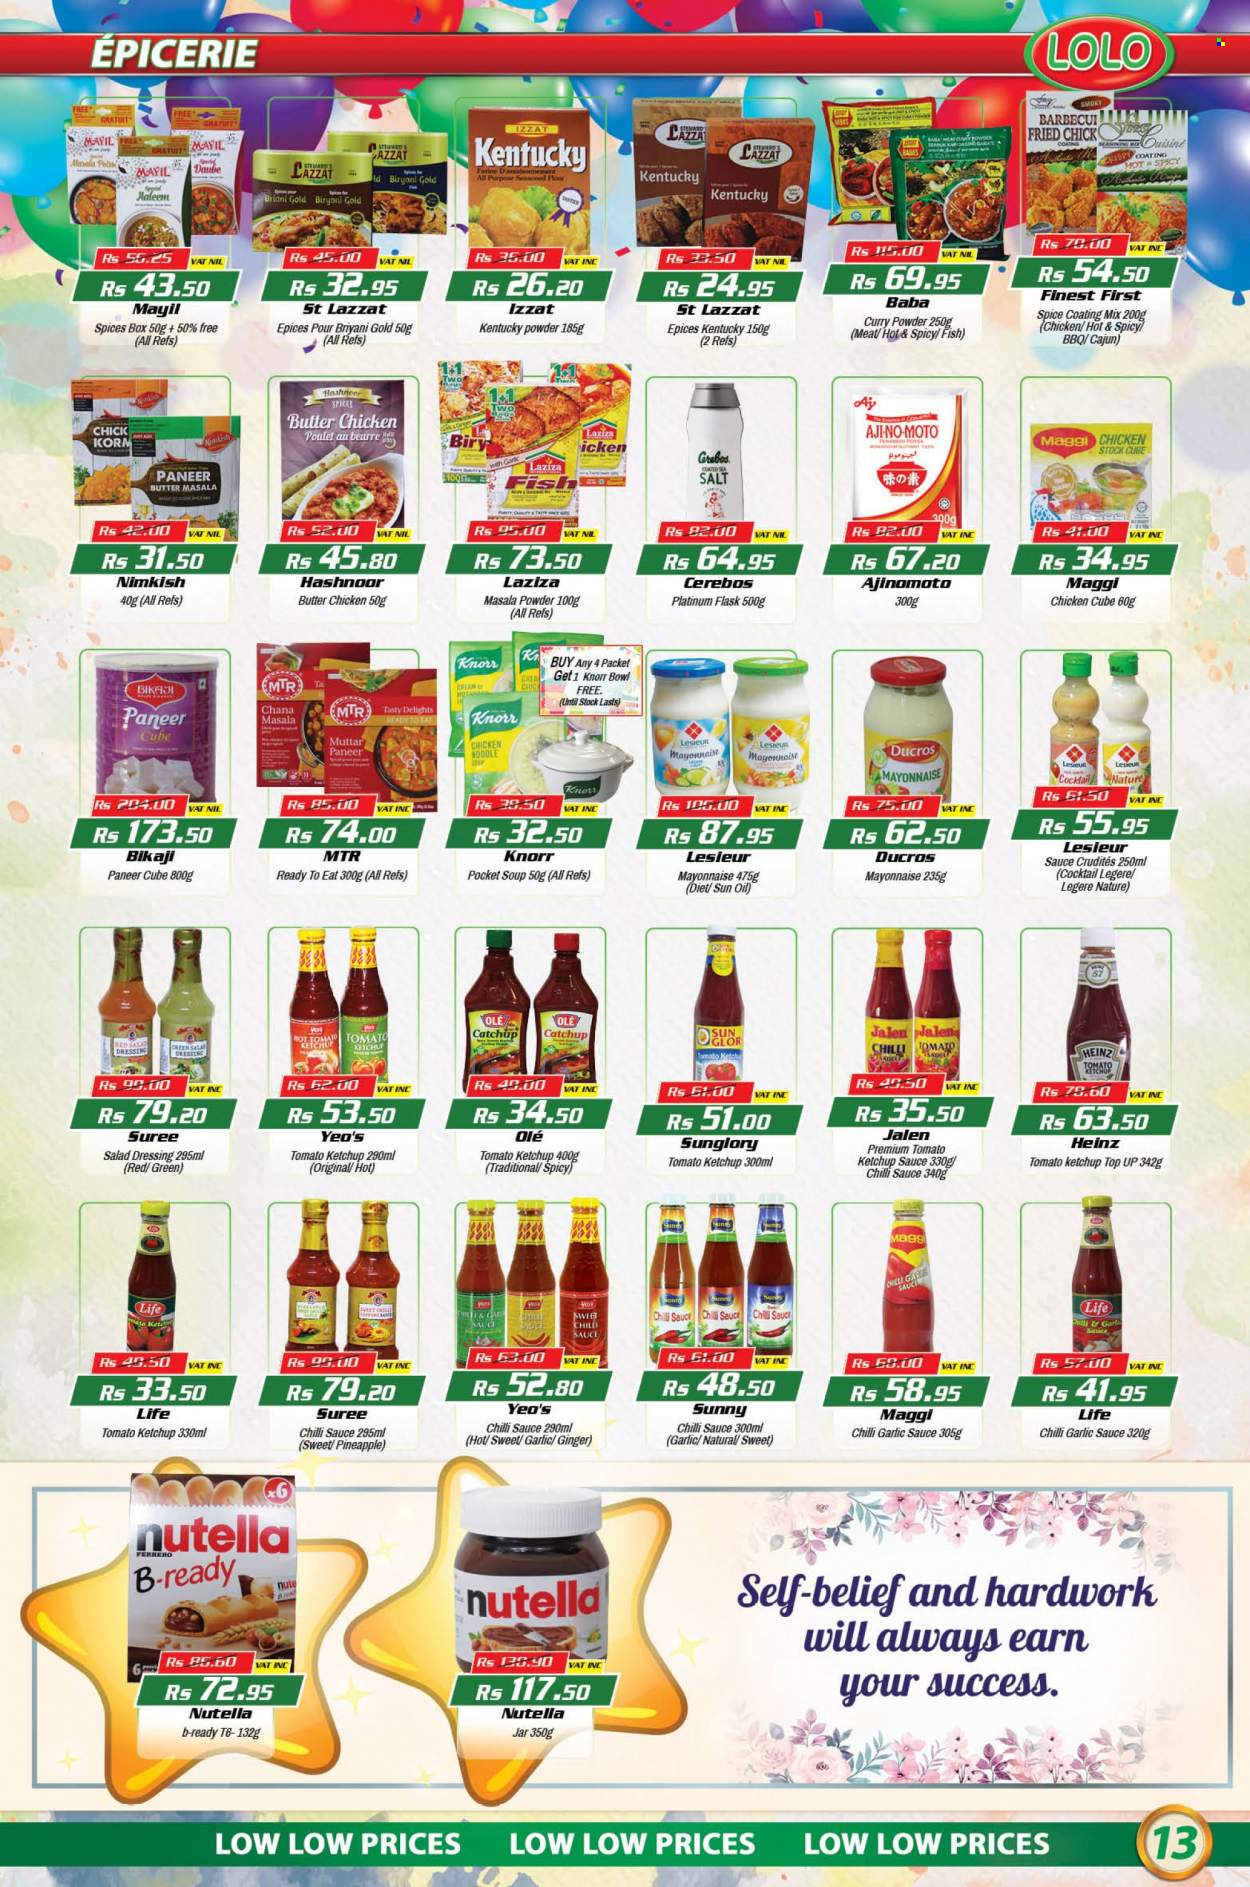 thumbnail - LOLO Hyper Catalogue - 26.07.2022 - 16.08.2022 - Sales products - ginger, pineapple, fish, soup, sauce, MTR, noodles, paneer, mayonnaise, flour, Maggi, sea salt, spice, curry powder, salad dressing, chilli sauce, dressing, garlic sauce, oil, Purity, bowl, jar, Heinz, ketchup, Nutella, Knorr. Page 13.